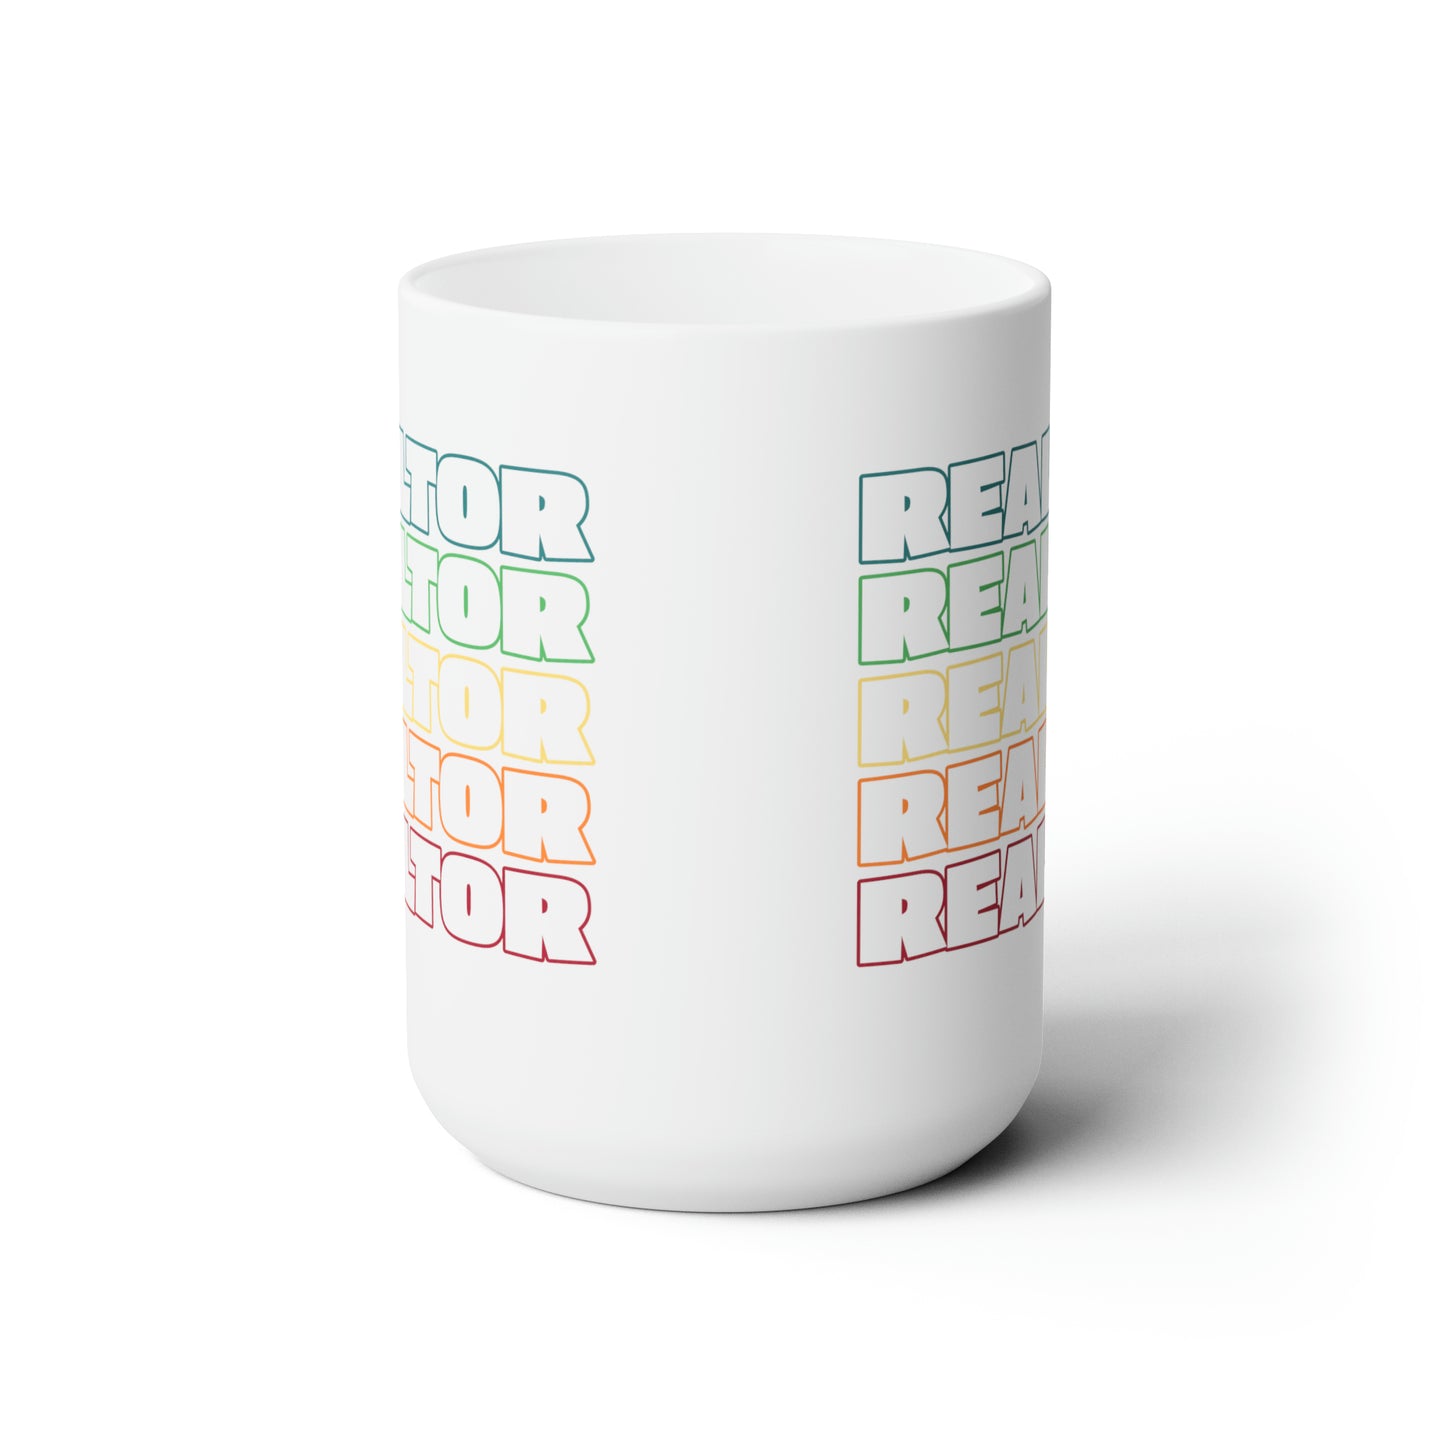 Colorful Realtor Coffee Mug For Real Estate Agent Hot Tea Cup Gift